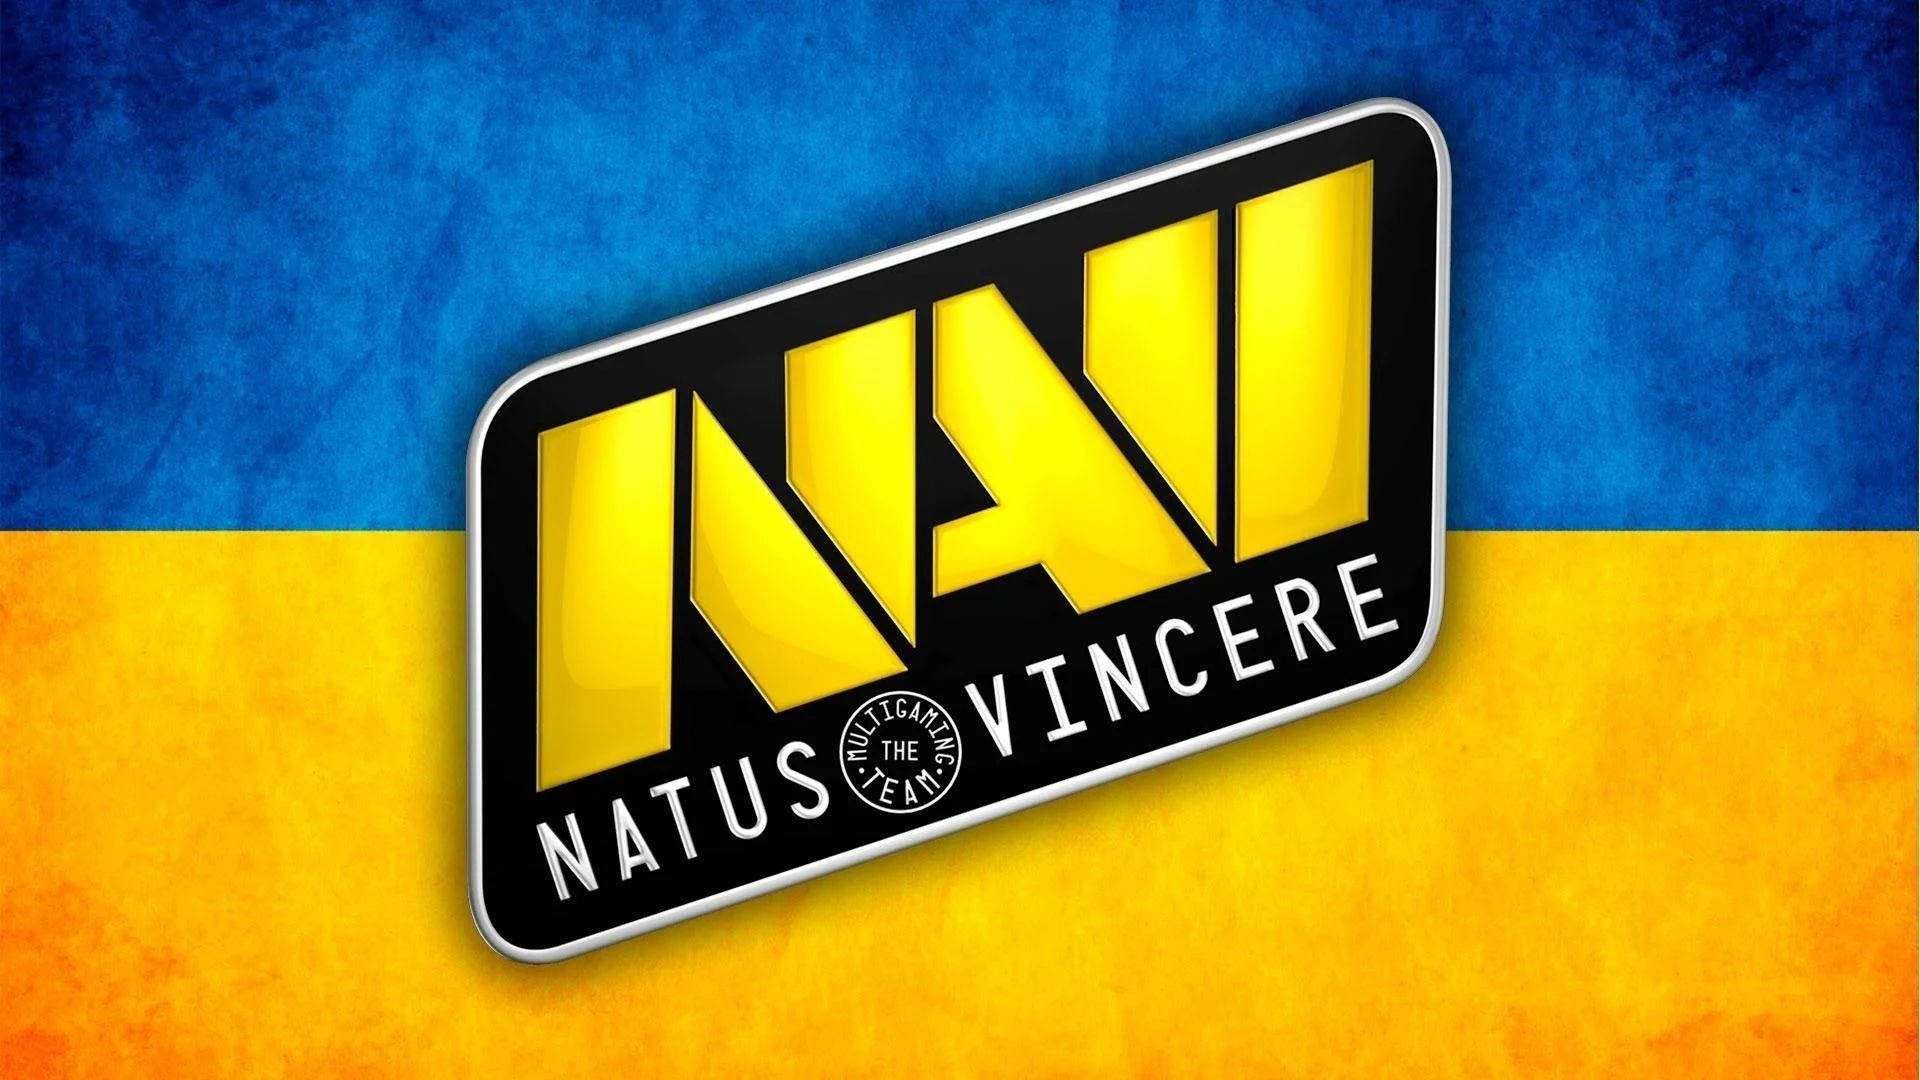 Natus Vincere In The Center